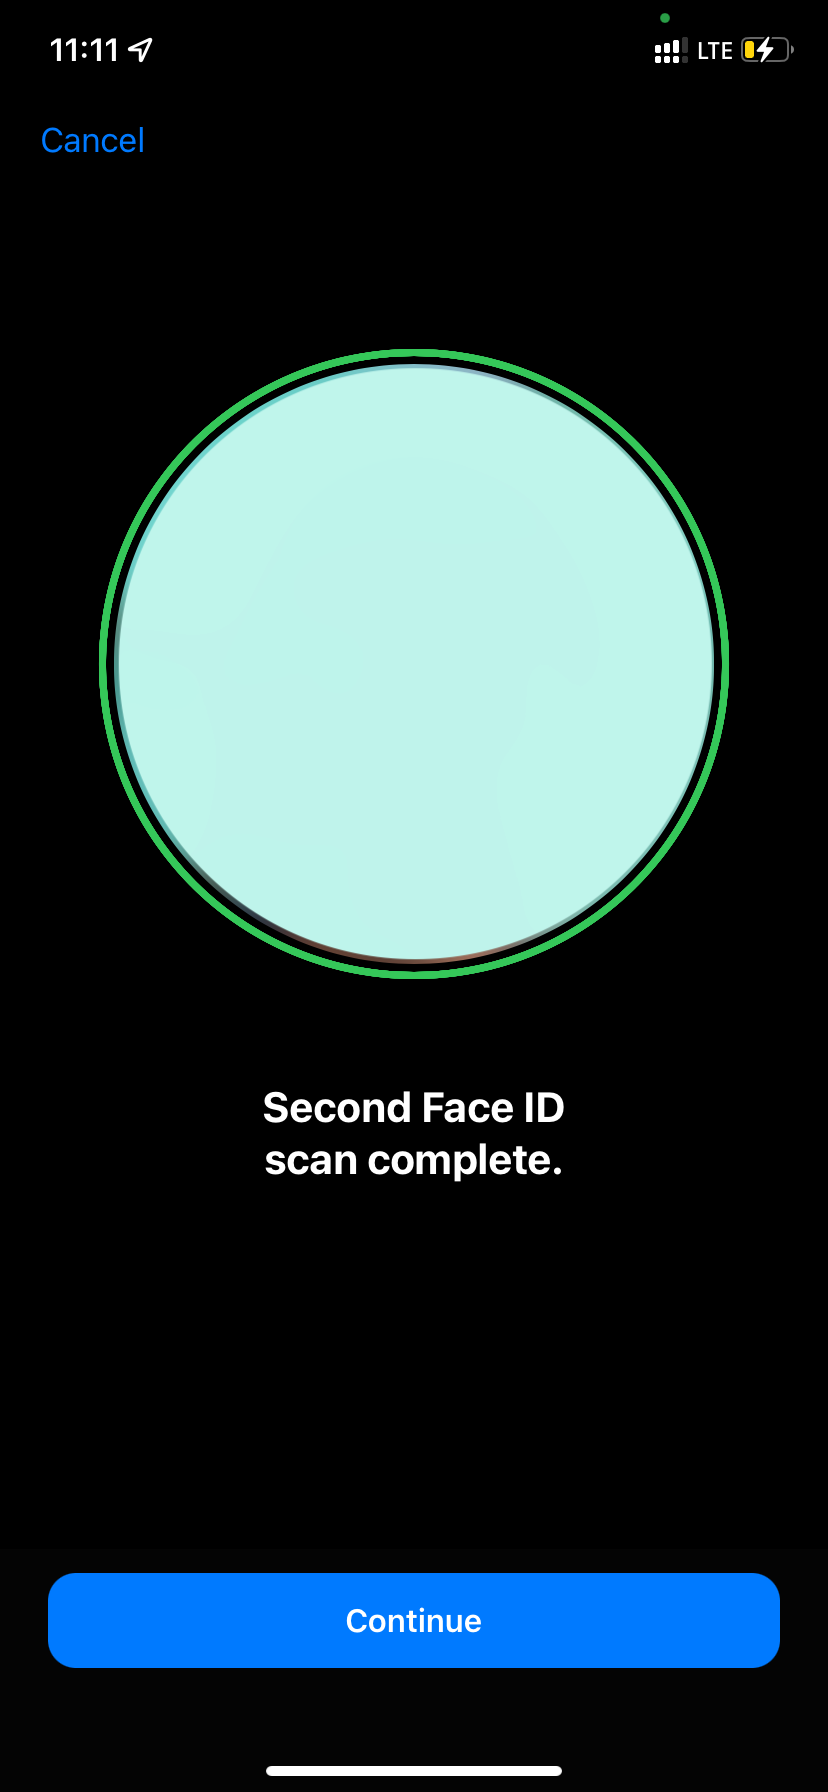 Second Face ID scan complete in iPhone settings